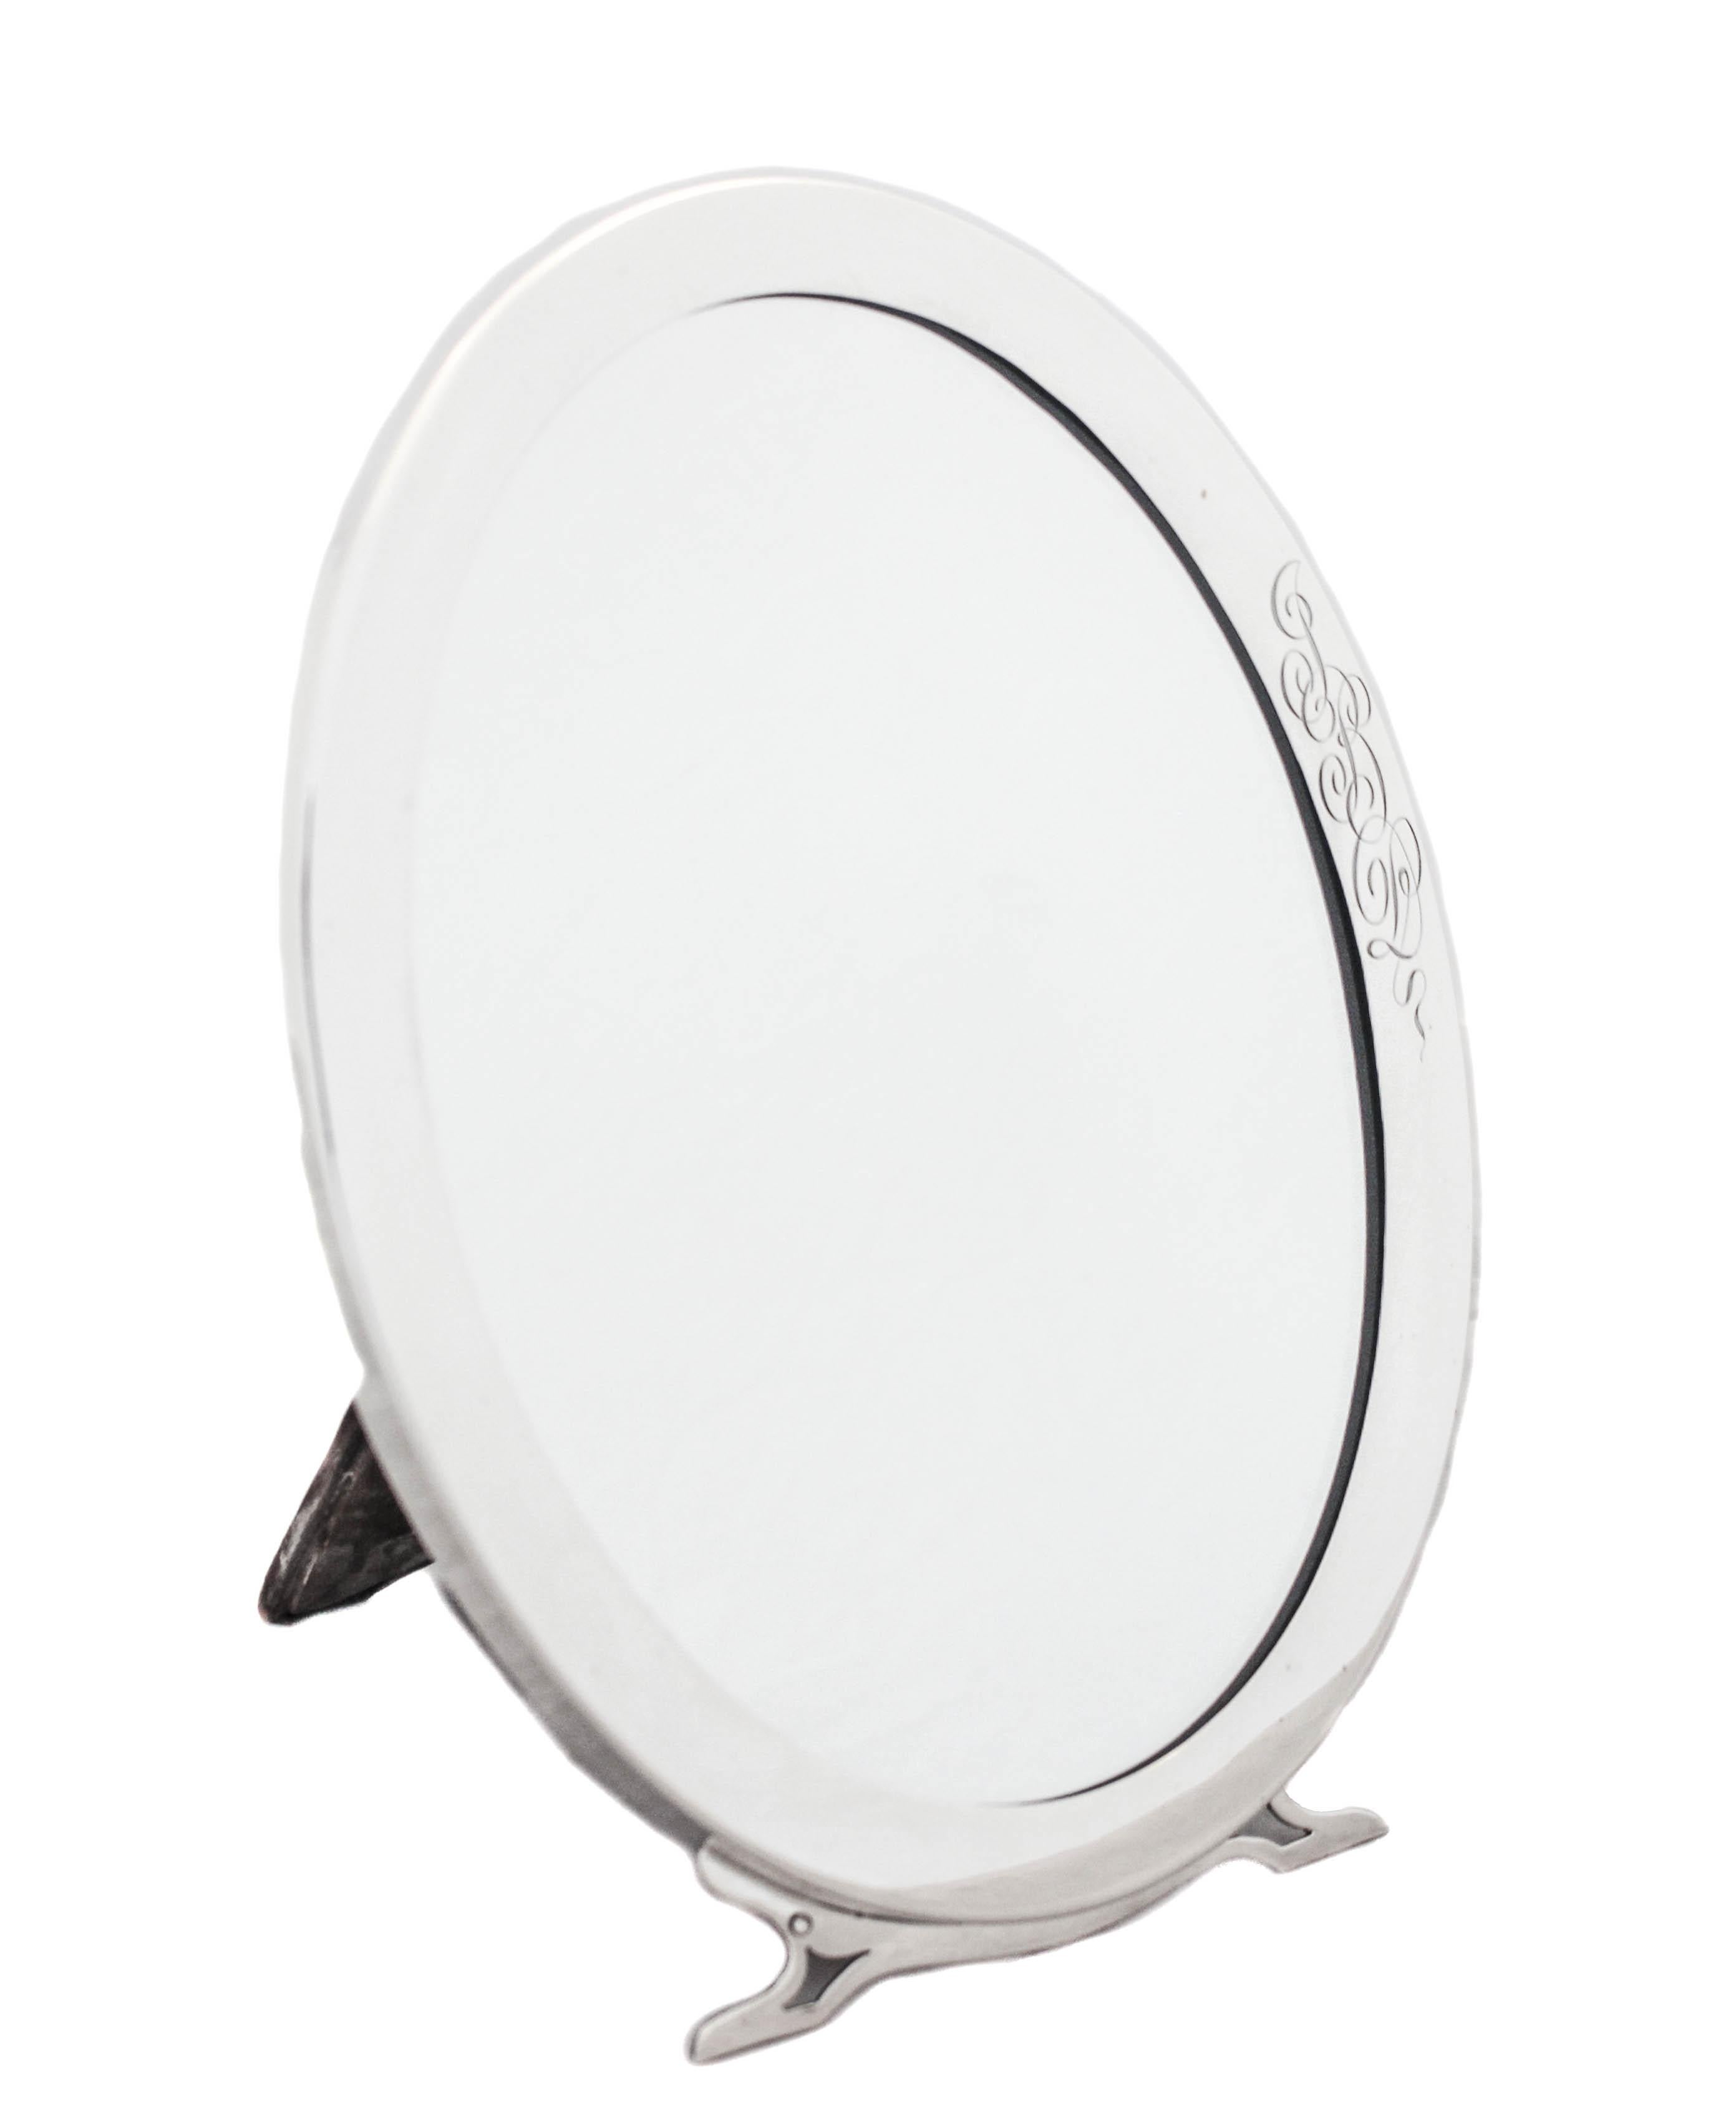 Being offered is this sterling silver table vanity mirror.  Made by George Henckel & Company of New York in 1940.  The simplicity and lack of decorative work reflect the austerity of that period.  On the bottom, the feet have an Art Deco style and